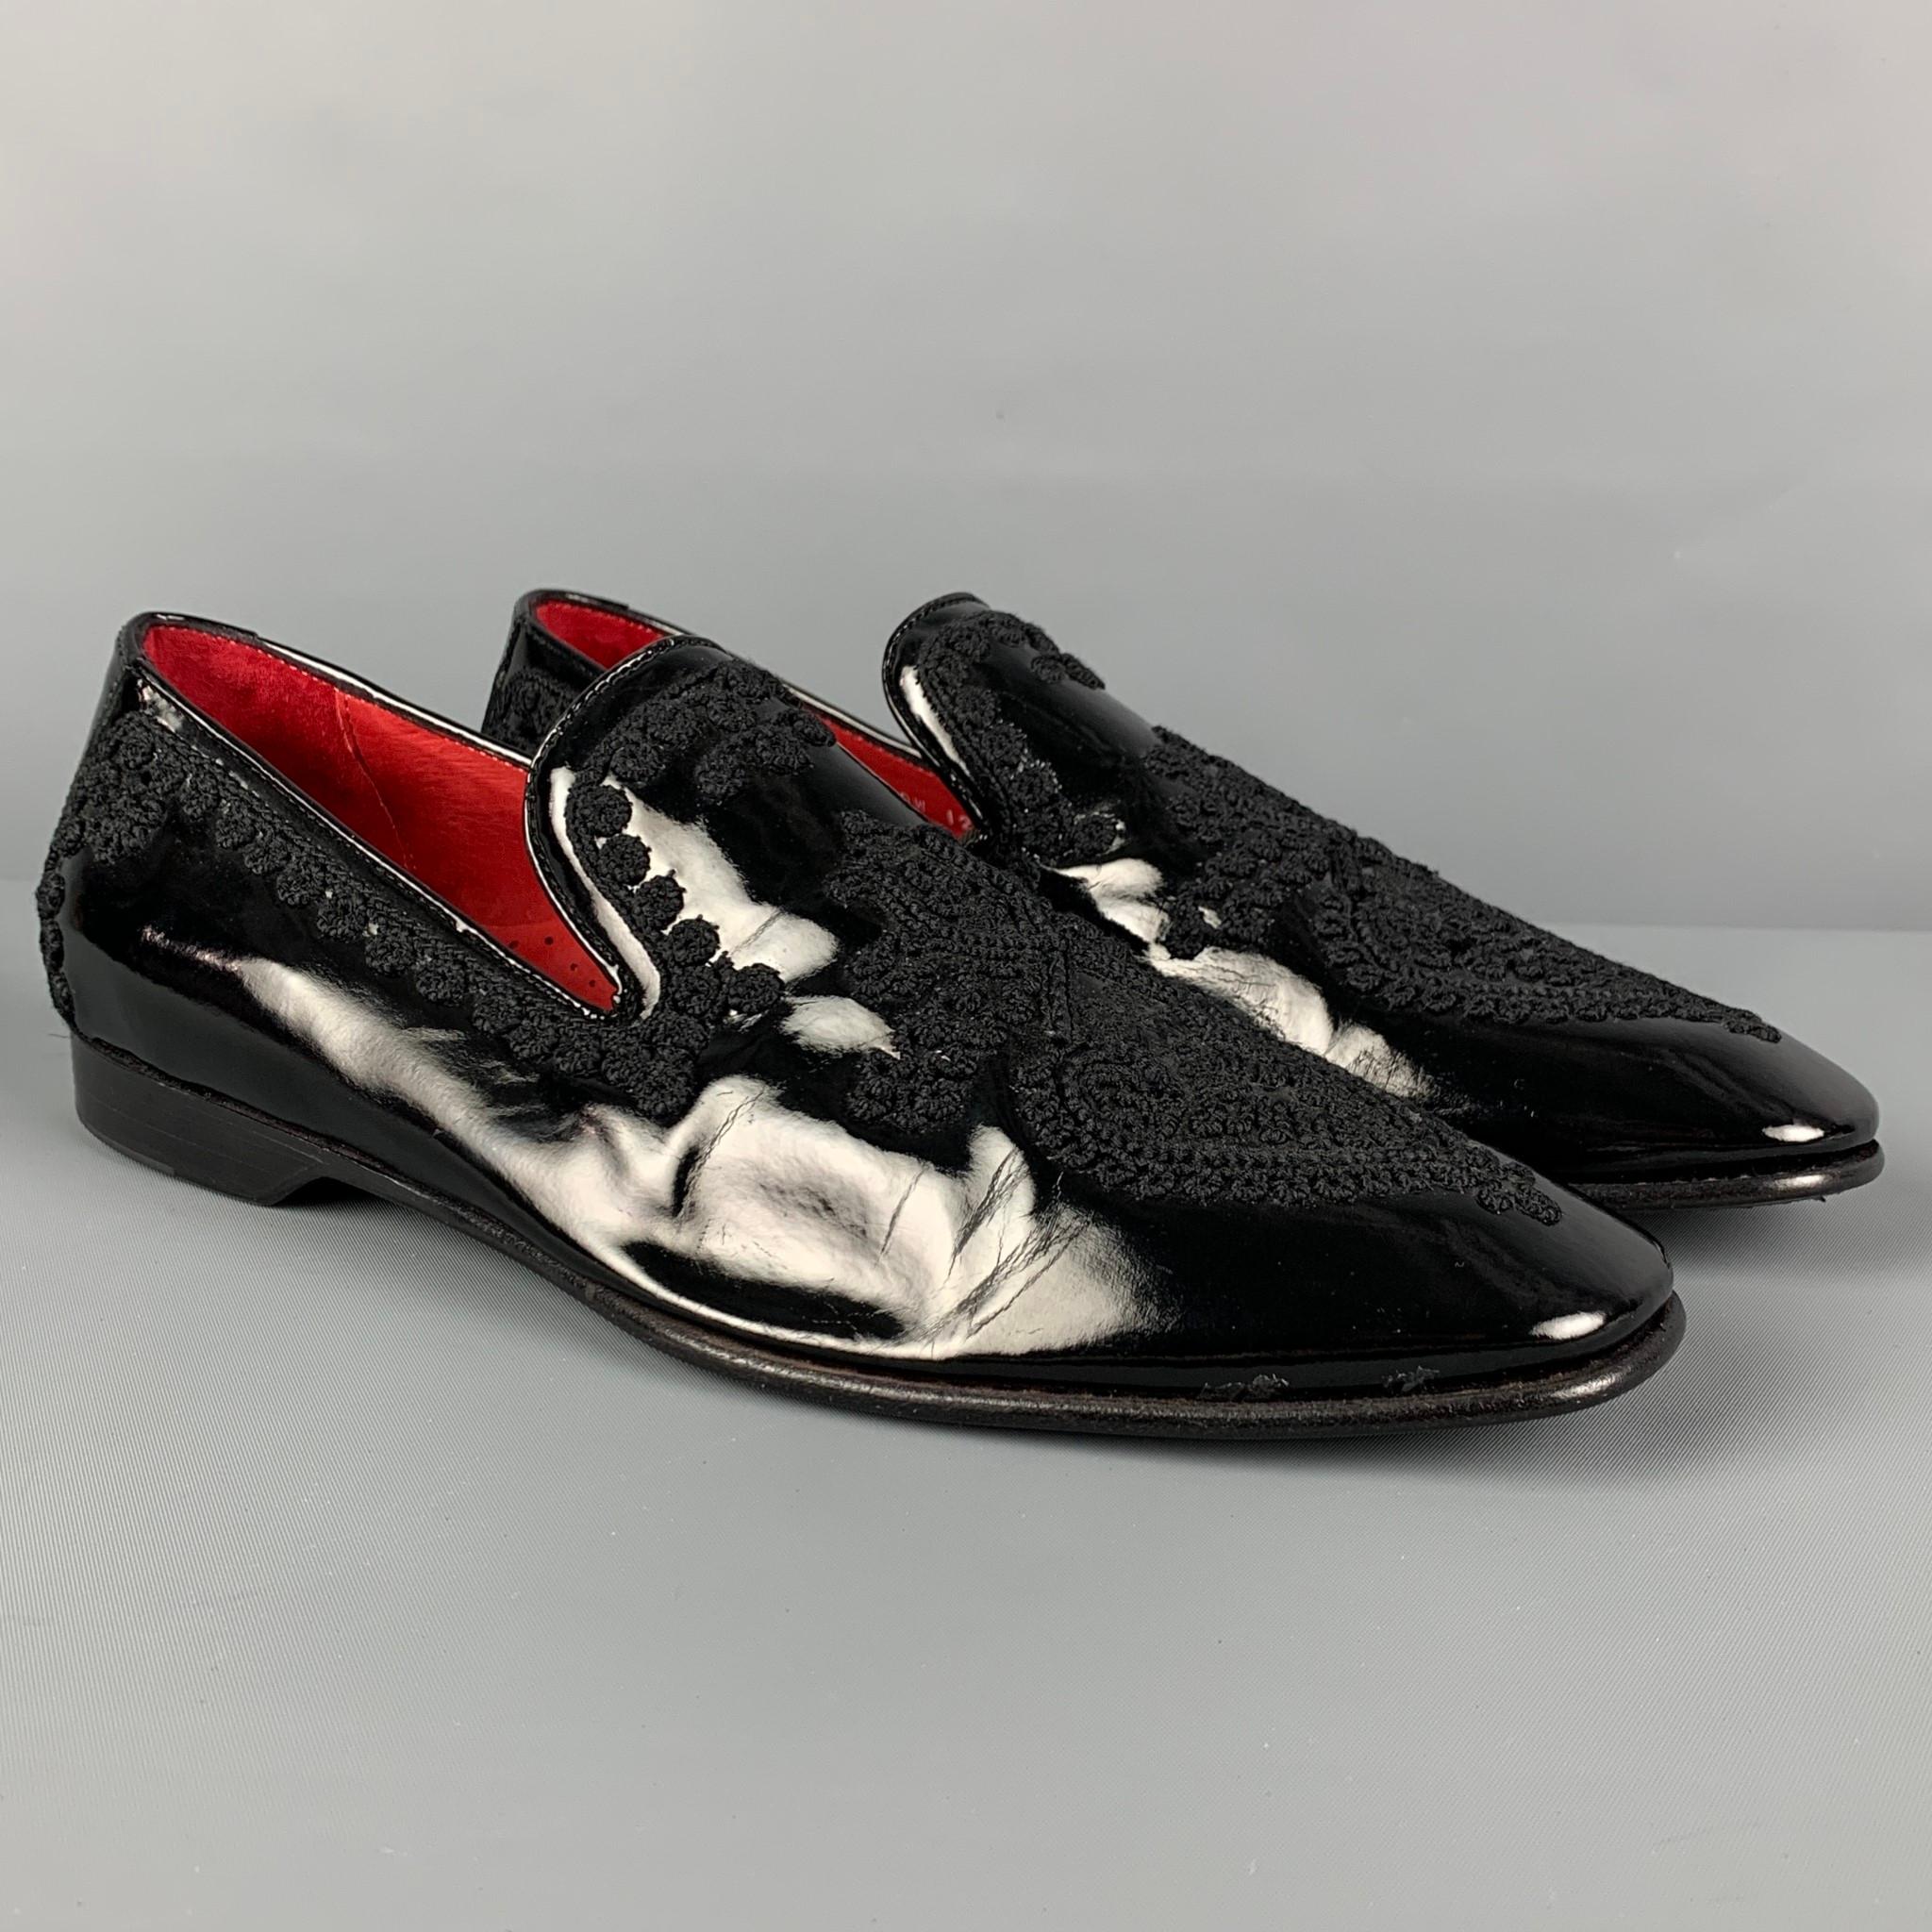 DONALD J PLINER loafers comes in a black beaded leather featuring a slip on style and a square toe. Made in Italy. 

Very Good Pre-Owned Condition. Light wear.
Marked: 120 9 M

Outsole: 12 in. x 4 in. 